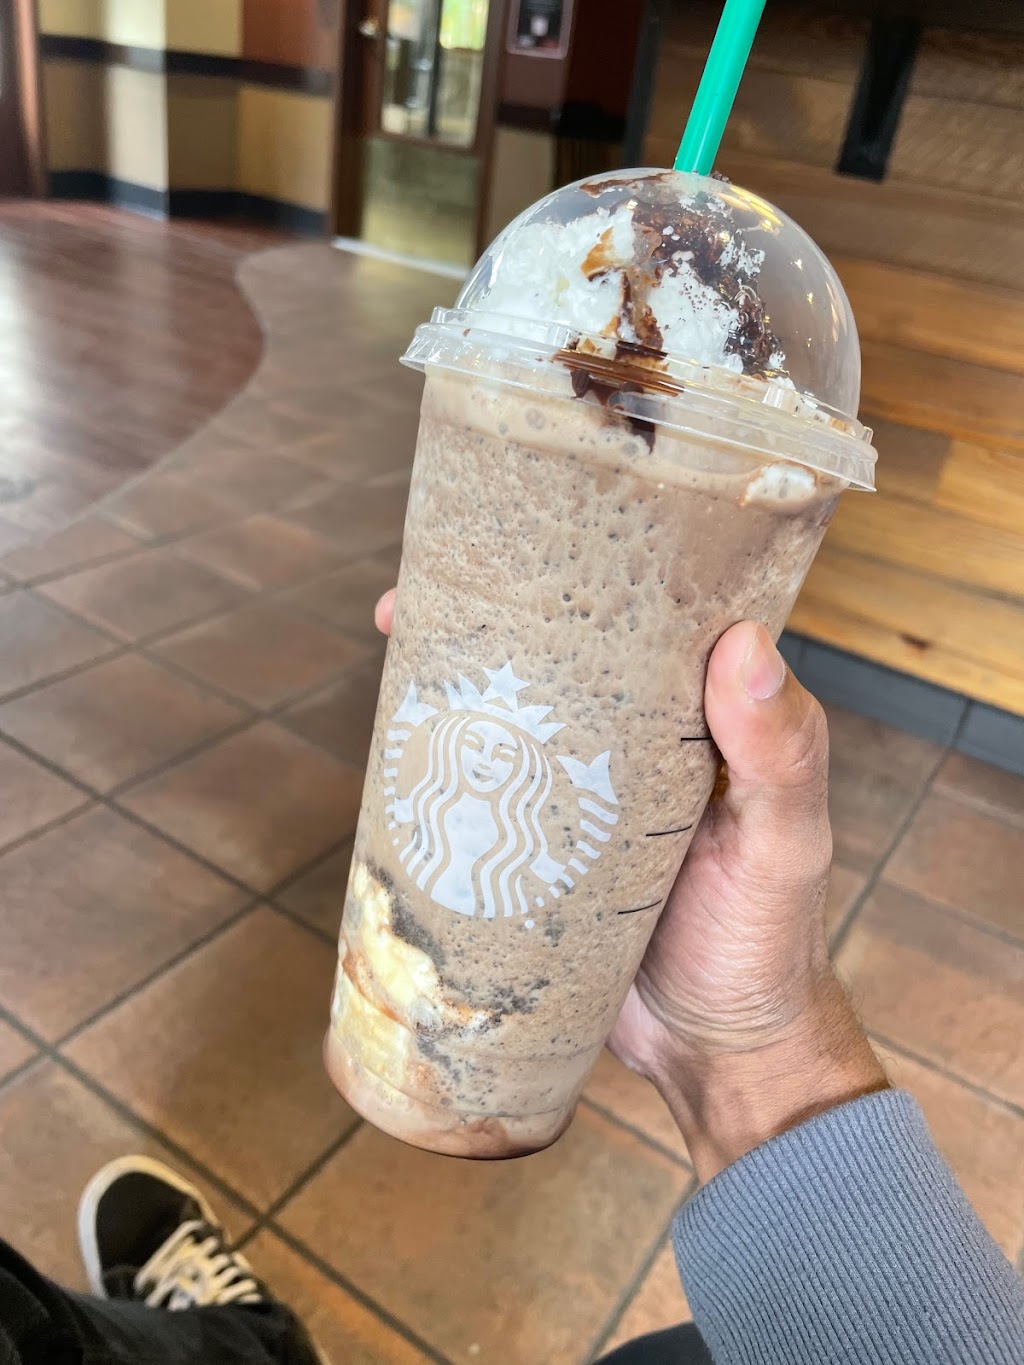 Starbucks | 1985 Squaw Valley Road, Olympic Valley, CA 96146, USA | Phone: (530) 584-6120